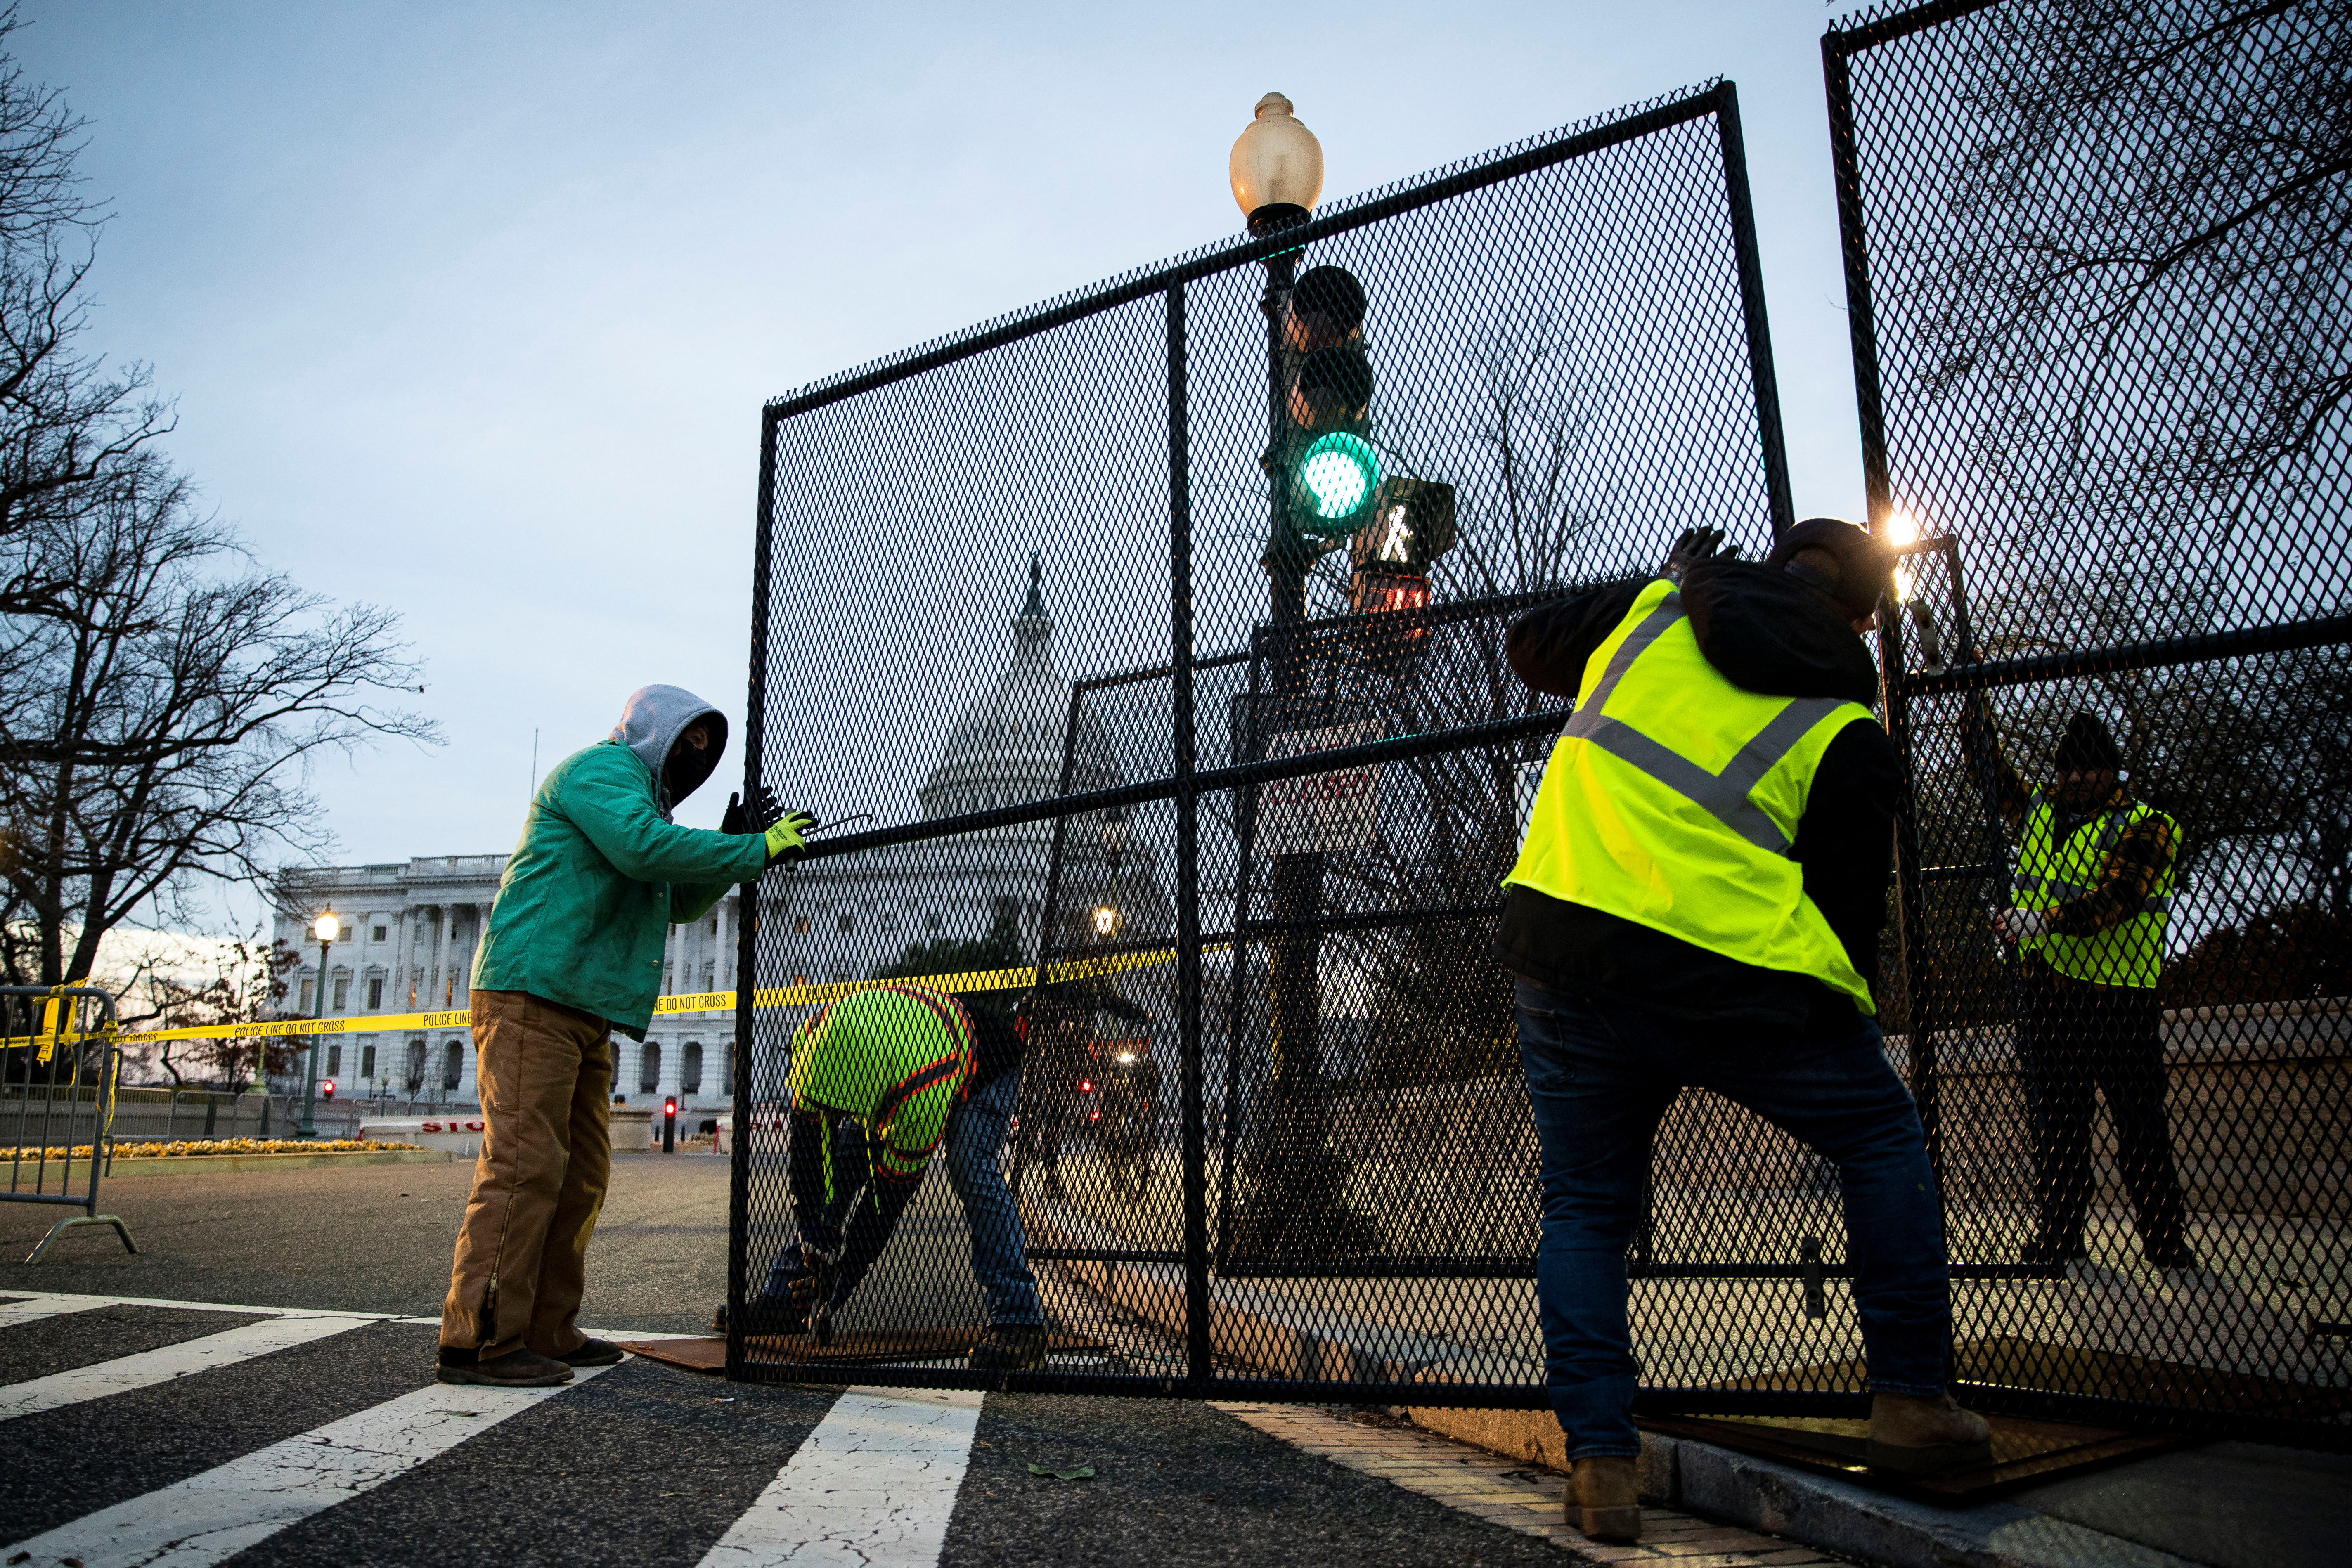 Workers install security fencing around the perimeter of the U.S. Capitol, ahead of the upcoming State of the Union with U.S. President Joe Biden